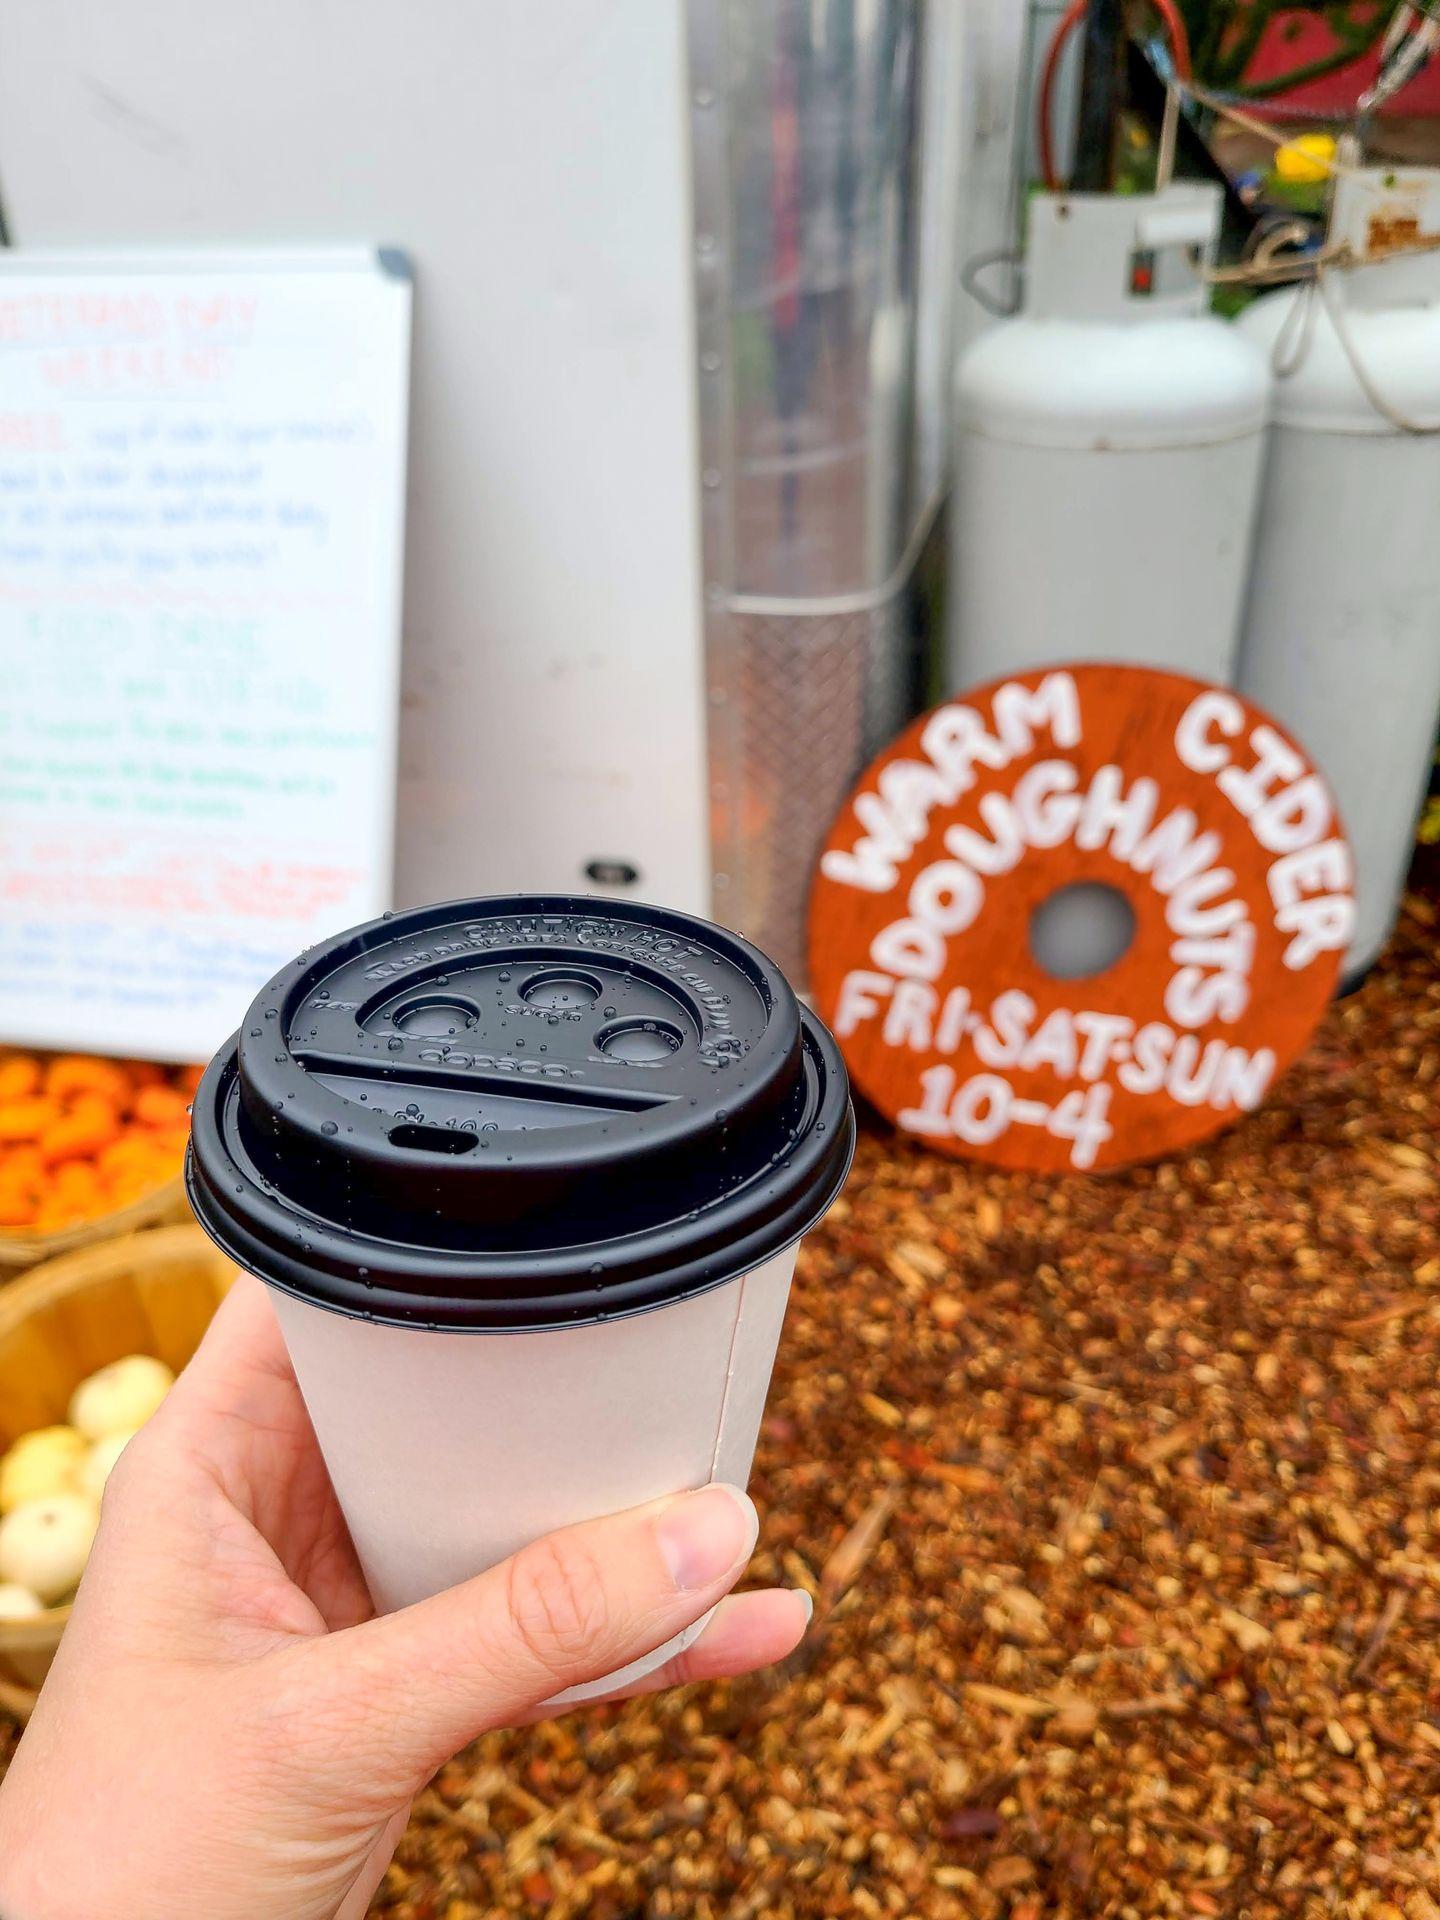 Holding a cup of hot apple cider. A sign in the background reads 'Warm cider doughnuts fri-sat-sun 10-4'